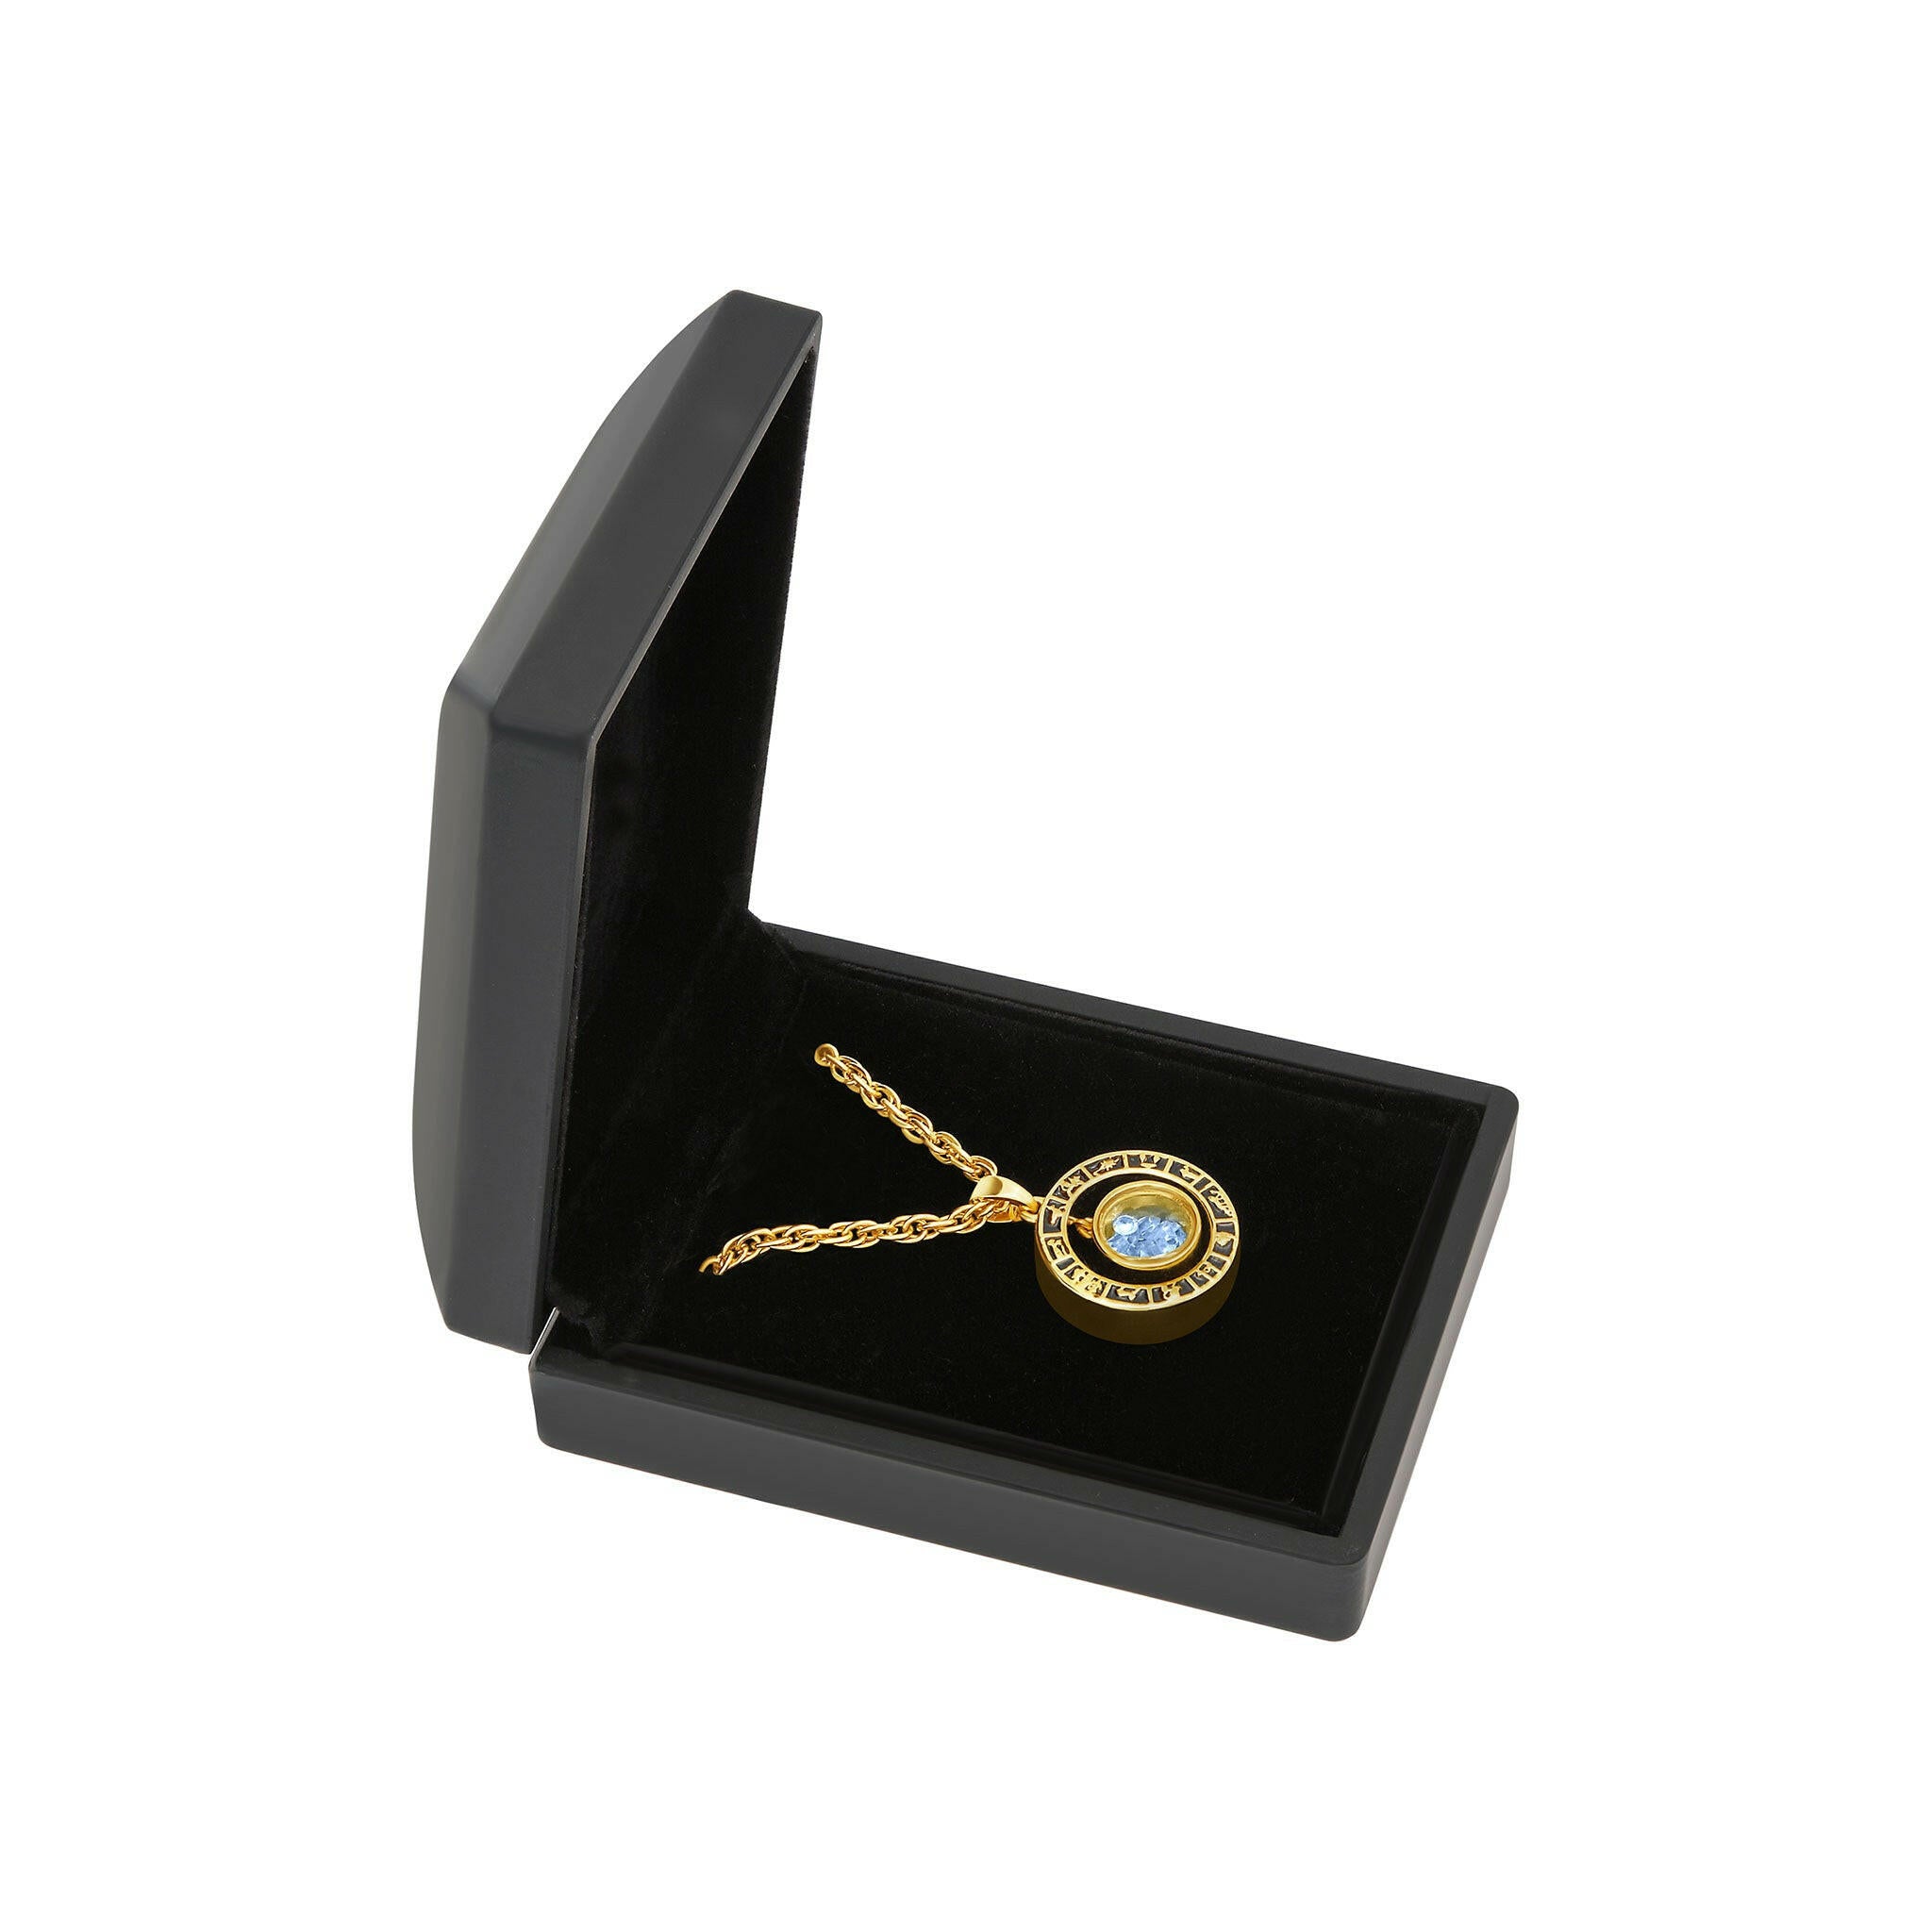 The Helena | Blue Sapphire | Yellow Gold | Astrological Pendant